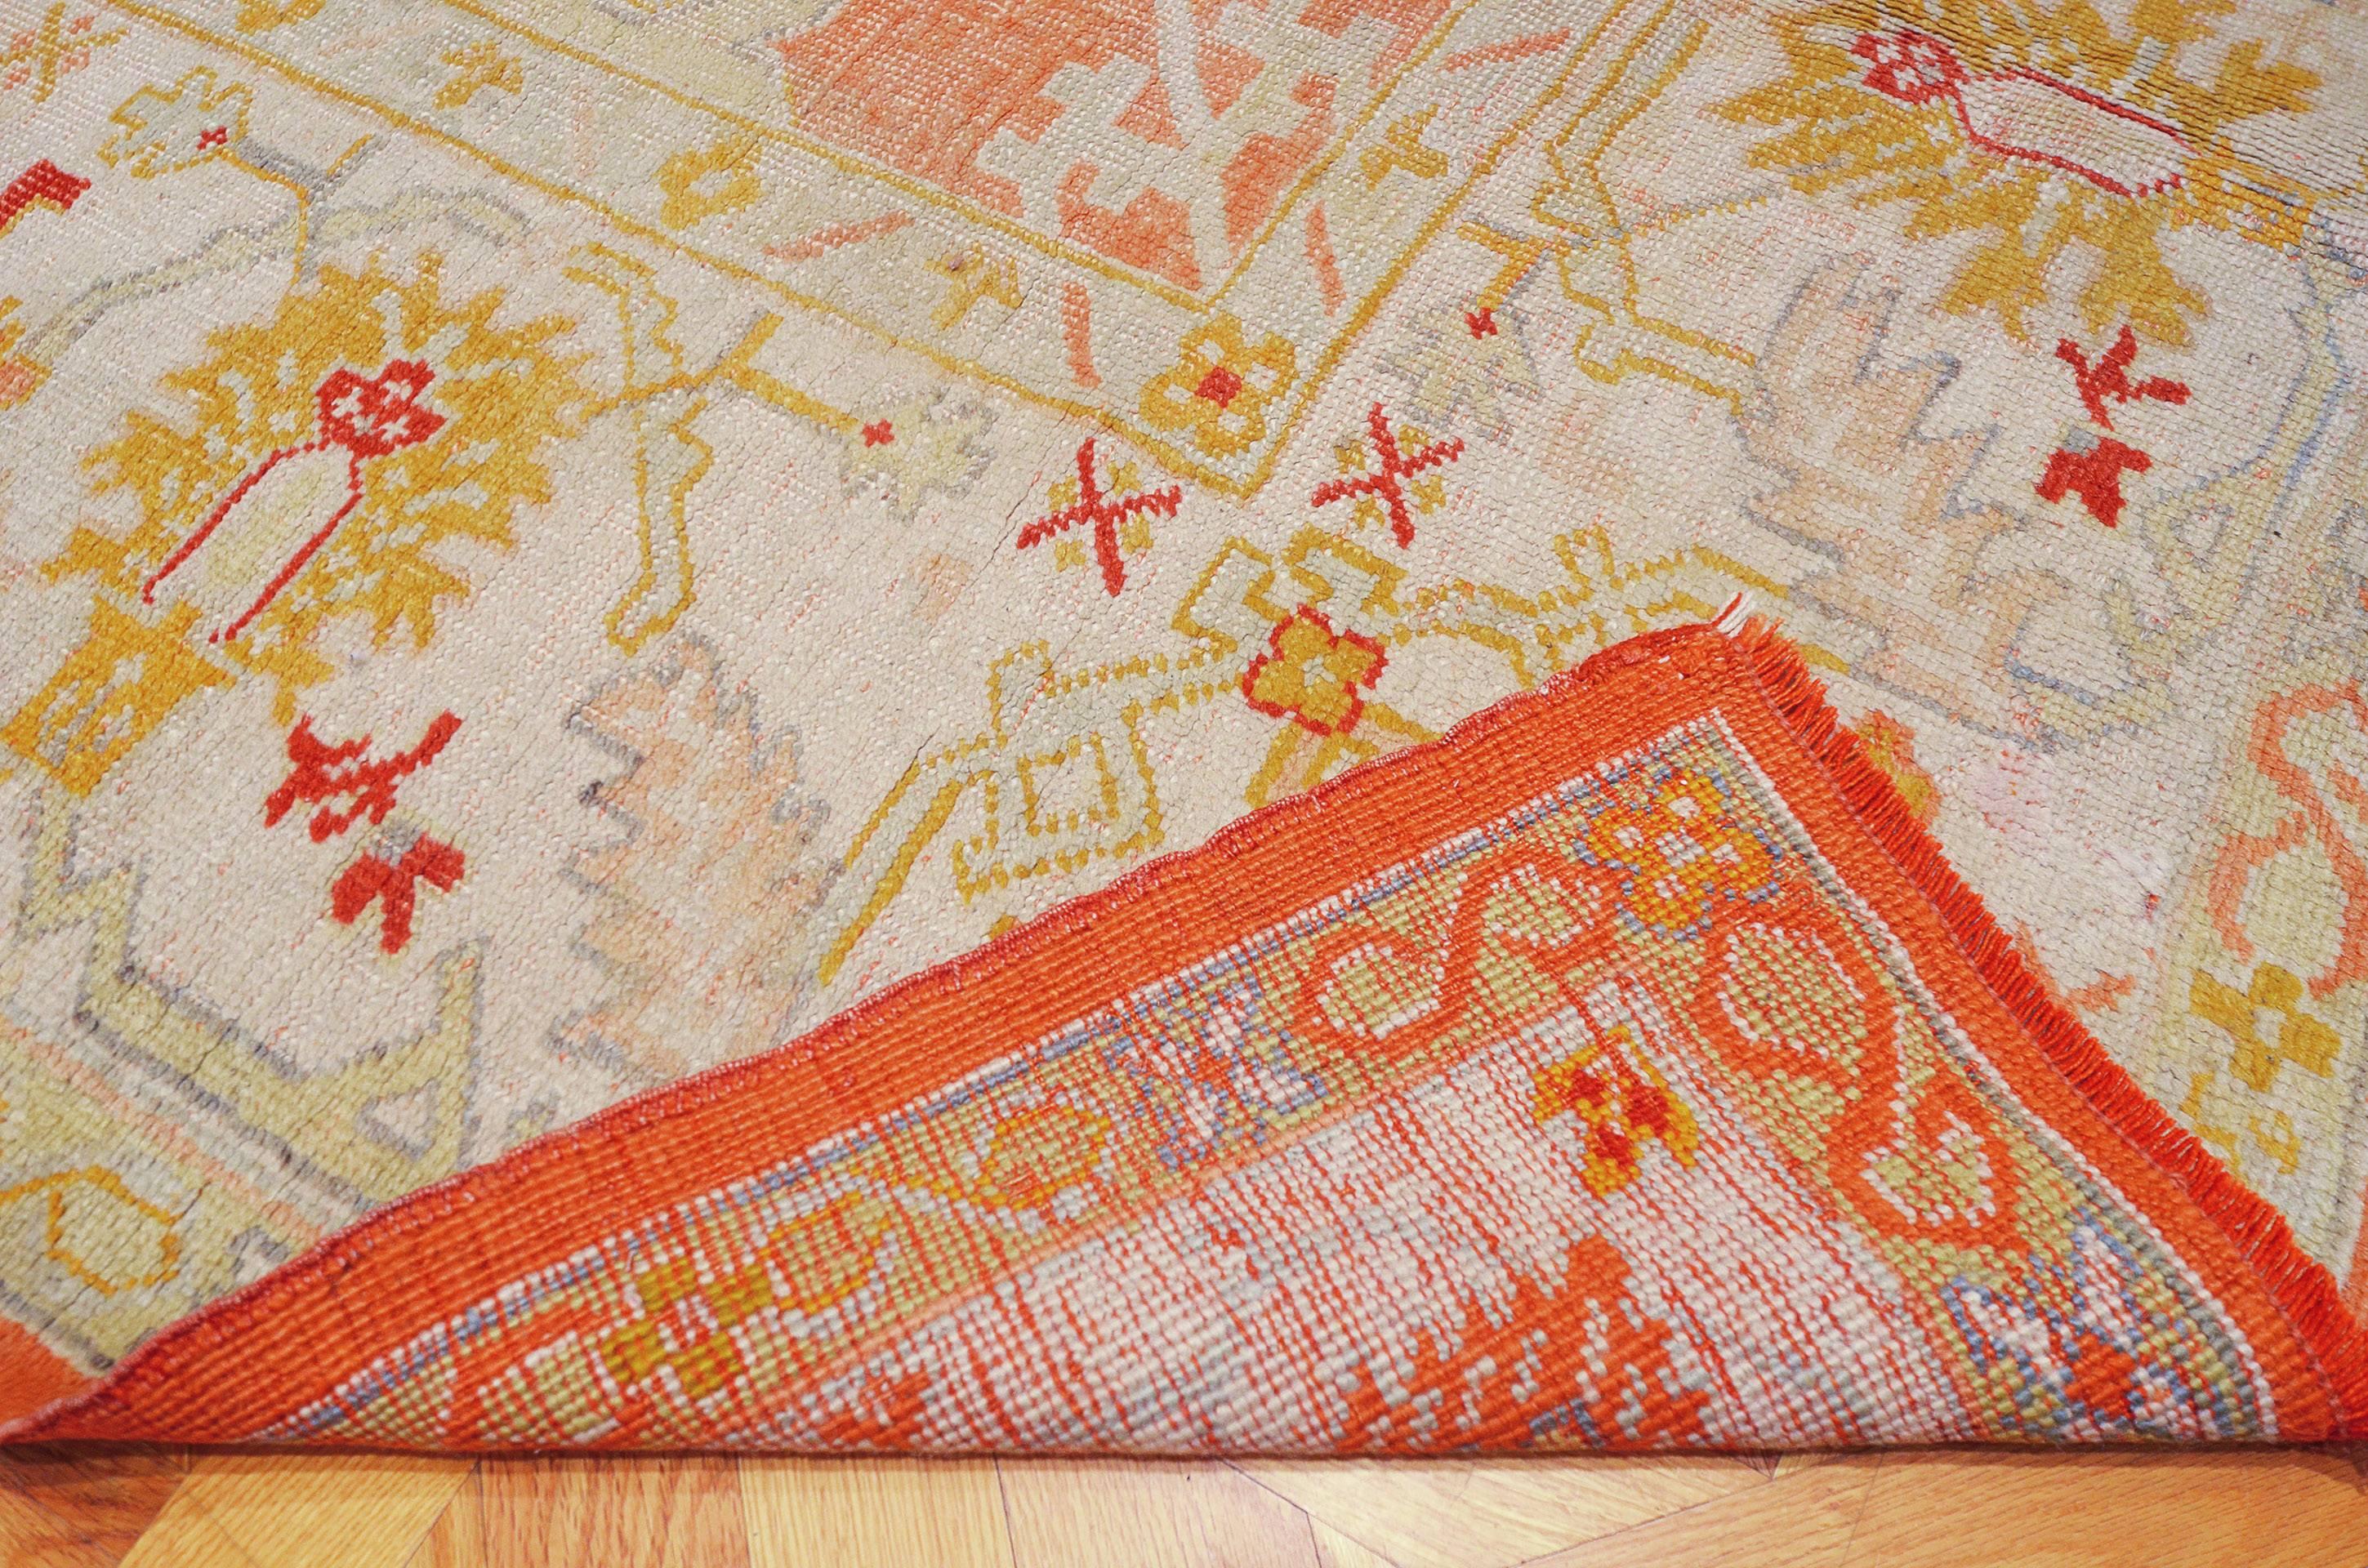 Hand-Knotted Late 19th Century Hand-Woven Oushak Wool Rug from West Anatolia For Sale